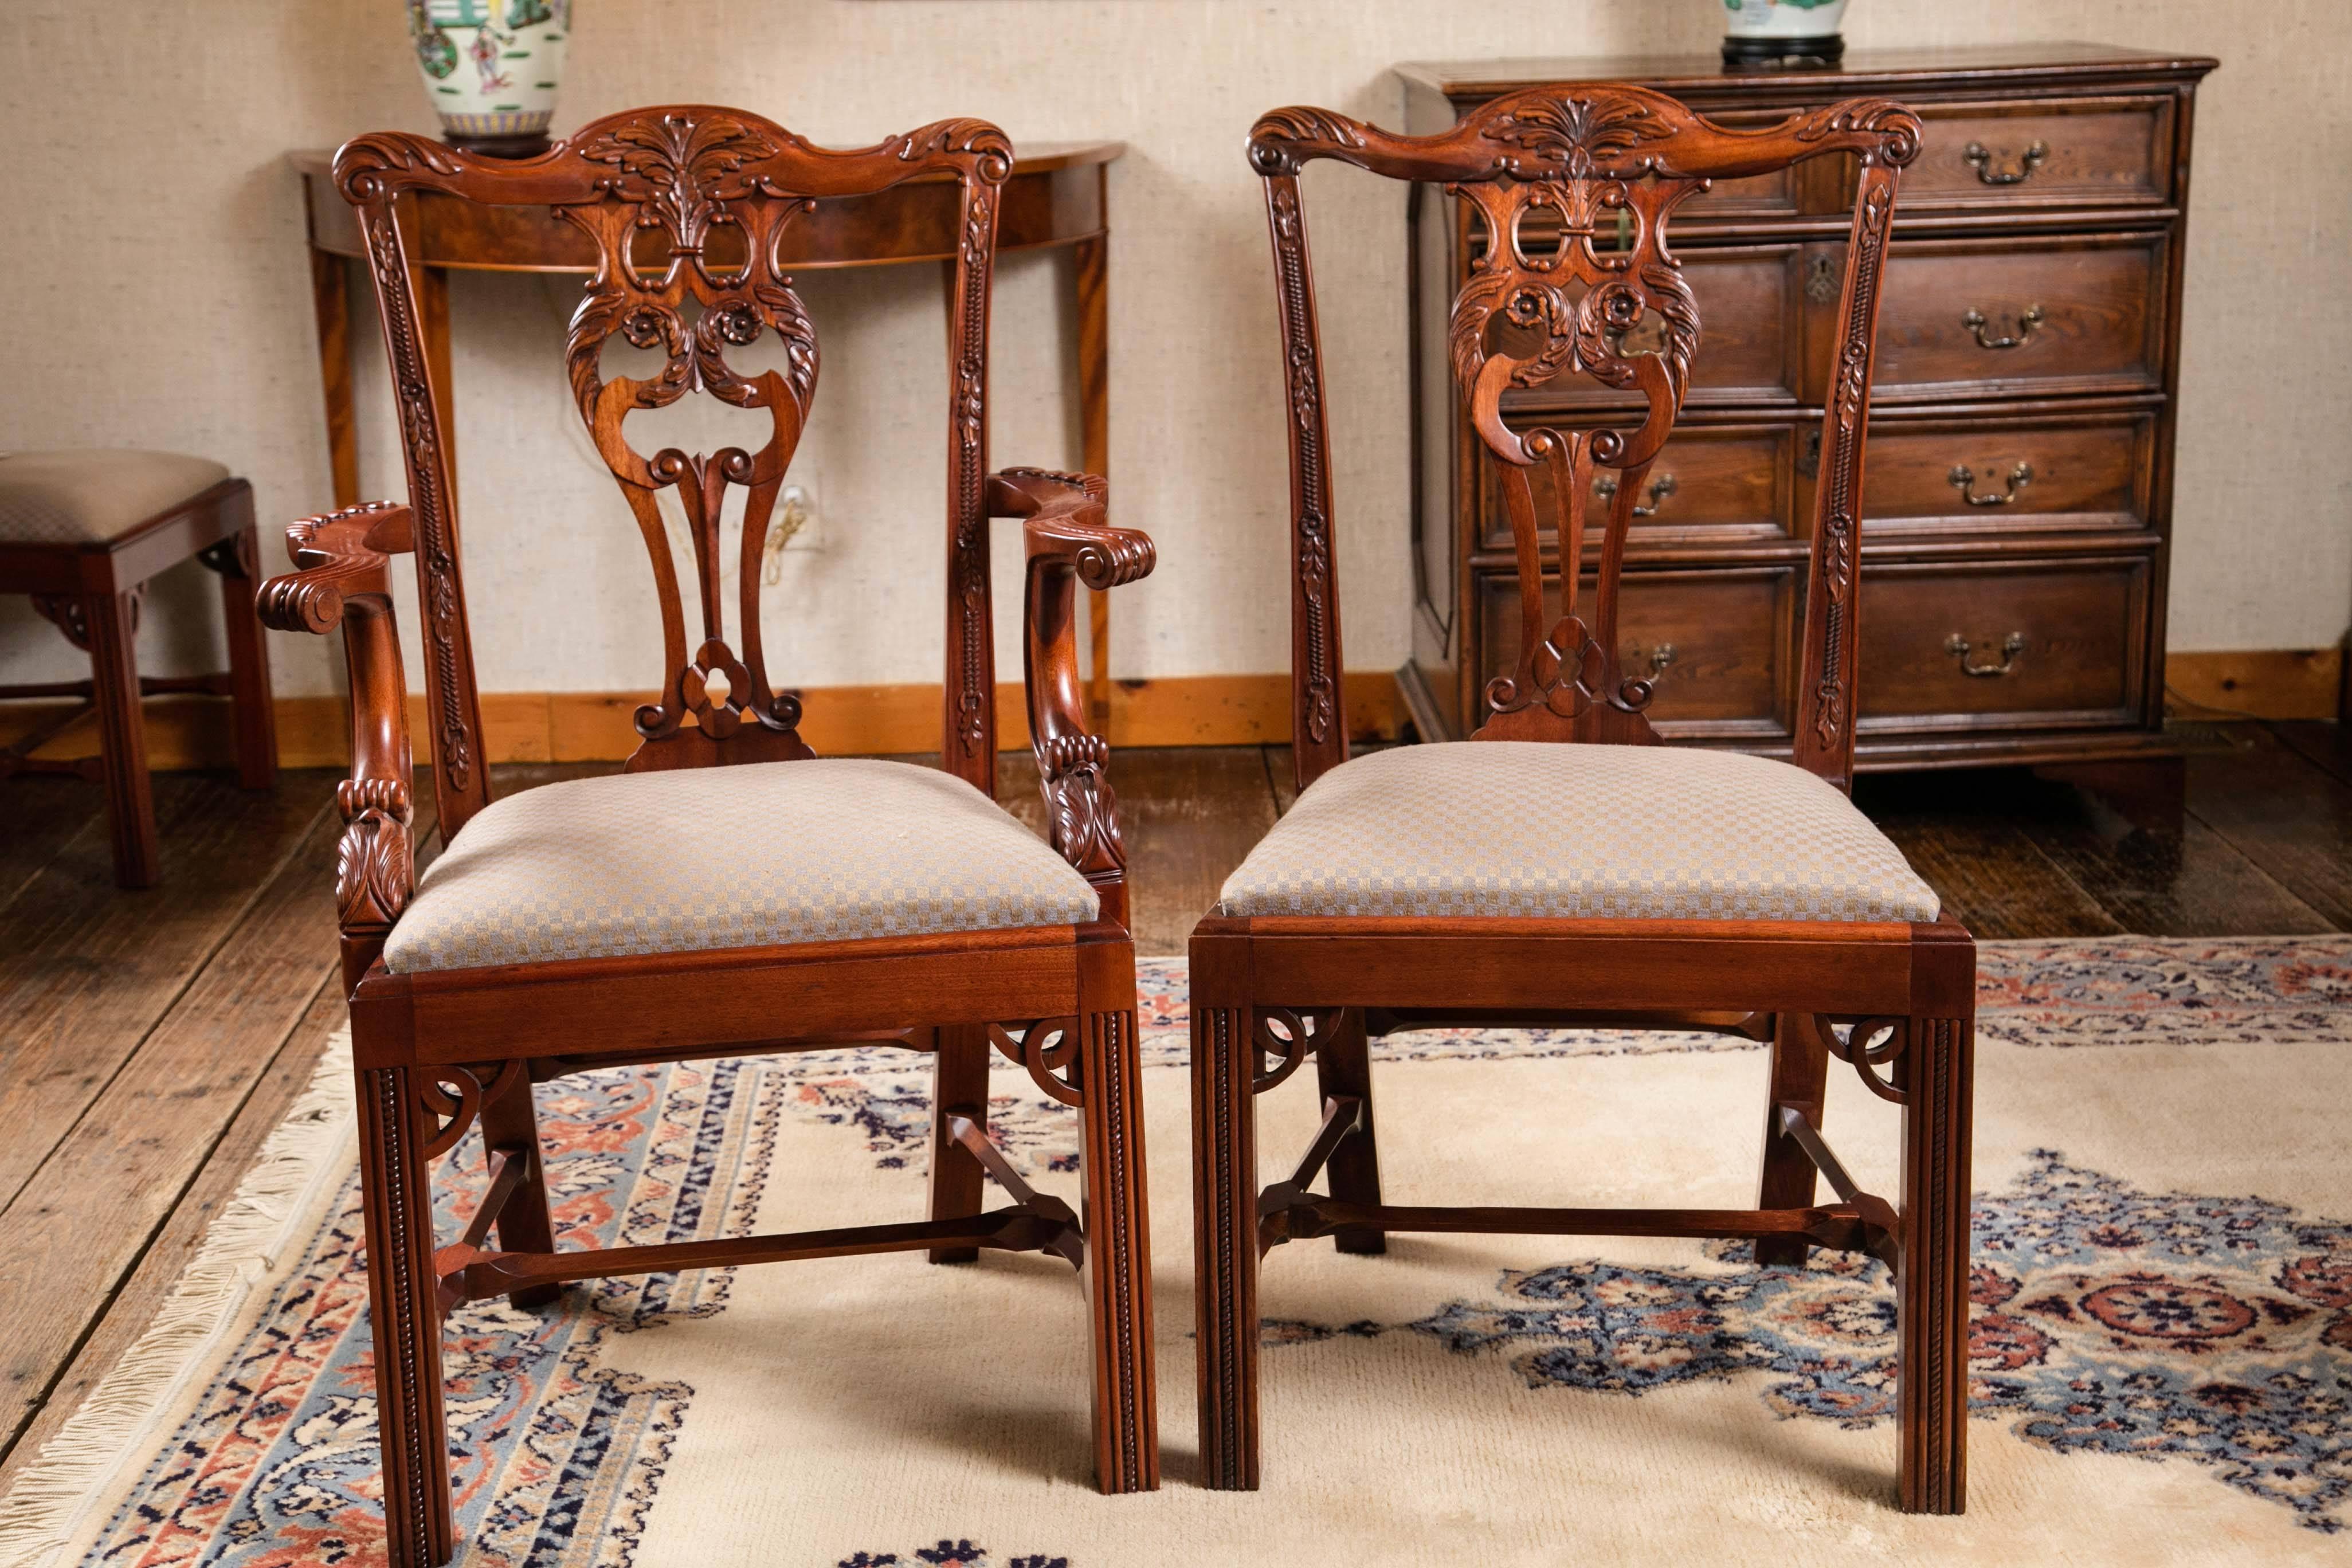 Set of 12 (two arms / ten sides) intricately carved mahogany dining chairs. These Irish Chippendale style dining chairs are the epitome of fine reproductions. From the acanthus themed carvings on the crest rail and splat to the leg brackets and